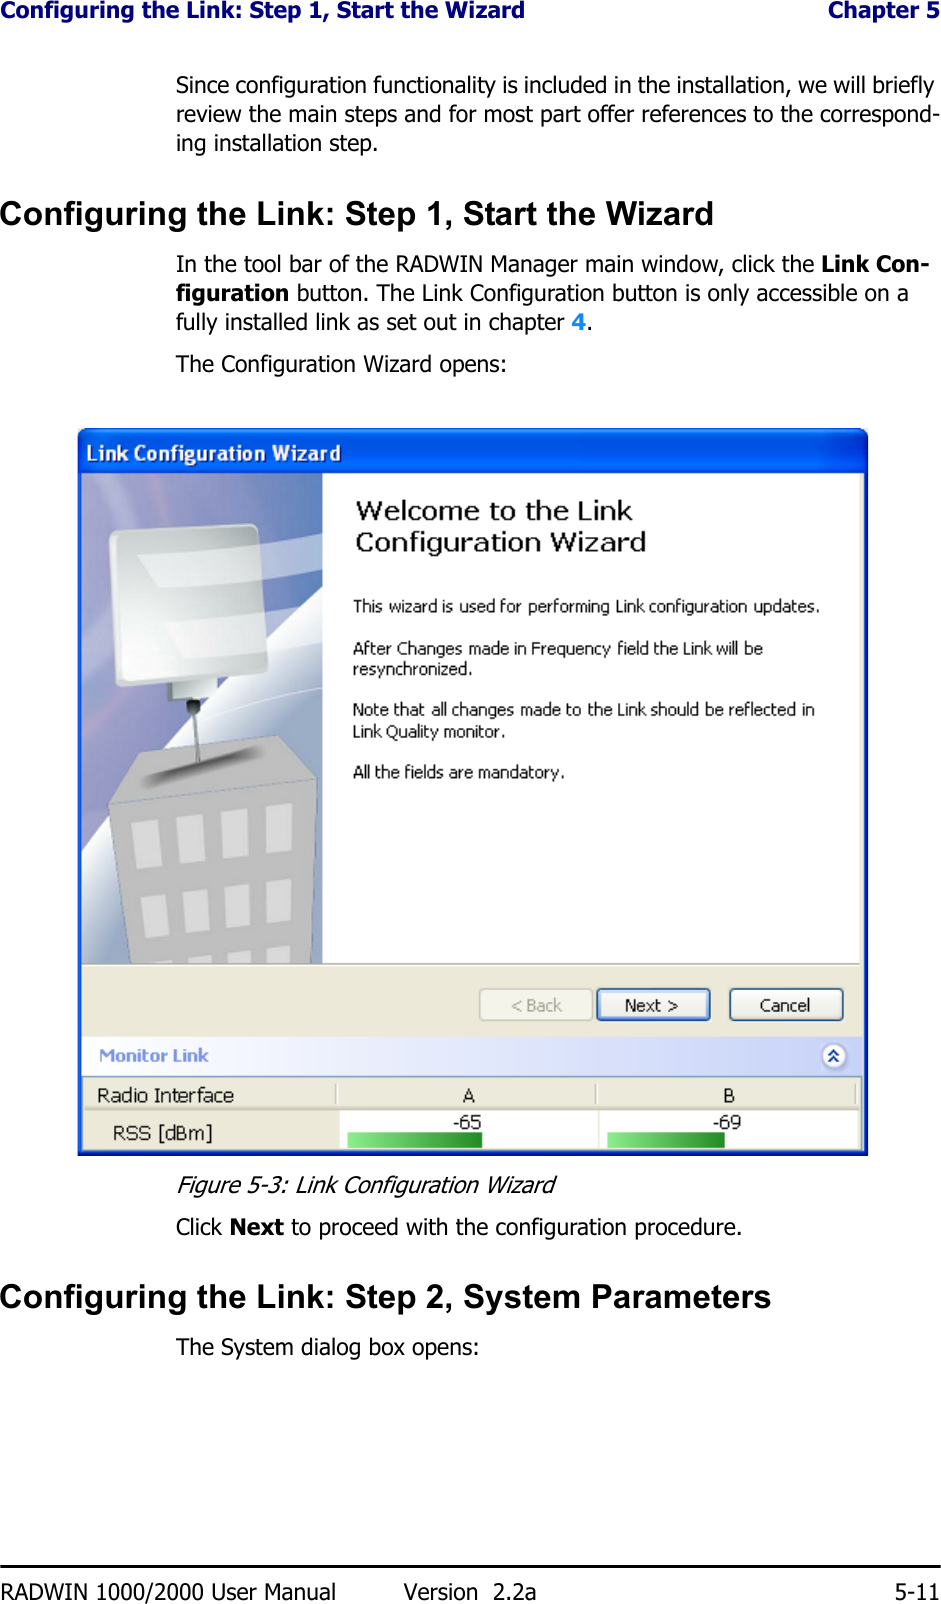 Configuring the Link: Step 1, Start the Wizard  Chapter 5RADWIN 1000/2000 User Manual Version  2.2a 5-11Since configuration functionality is included in the installation, we will briefly review the main steps and for most part offer references to the correspond-ing installation step.Configuring the Link: Step 1, Start the WizardIn the tool bar of the RADWIN Manager main window, click the Link Con-figuration button. The Link Configuration button is only accessible on a fully installed link as set out in chapter 4.The Configuration Wizard opens:Figure 5-3: Link Configuration WizardClick Next to proceed with the configuration procedure.Configuring the Link: Step 2, System ParametersThe System dialog box opens: